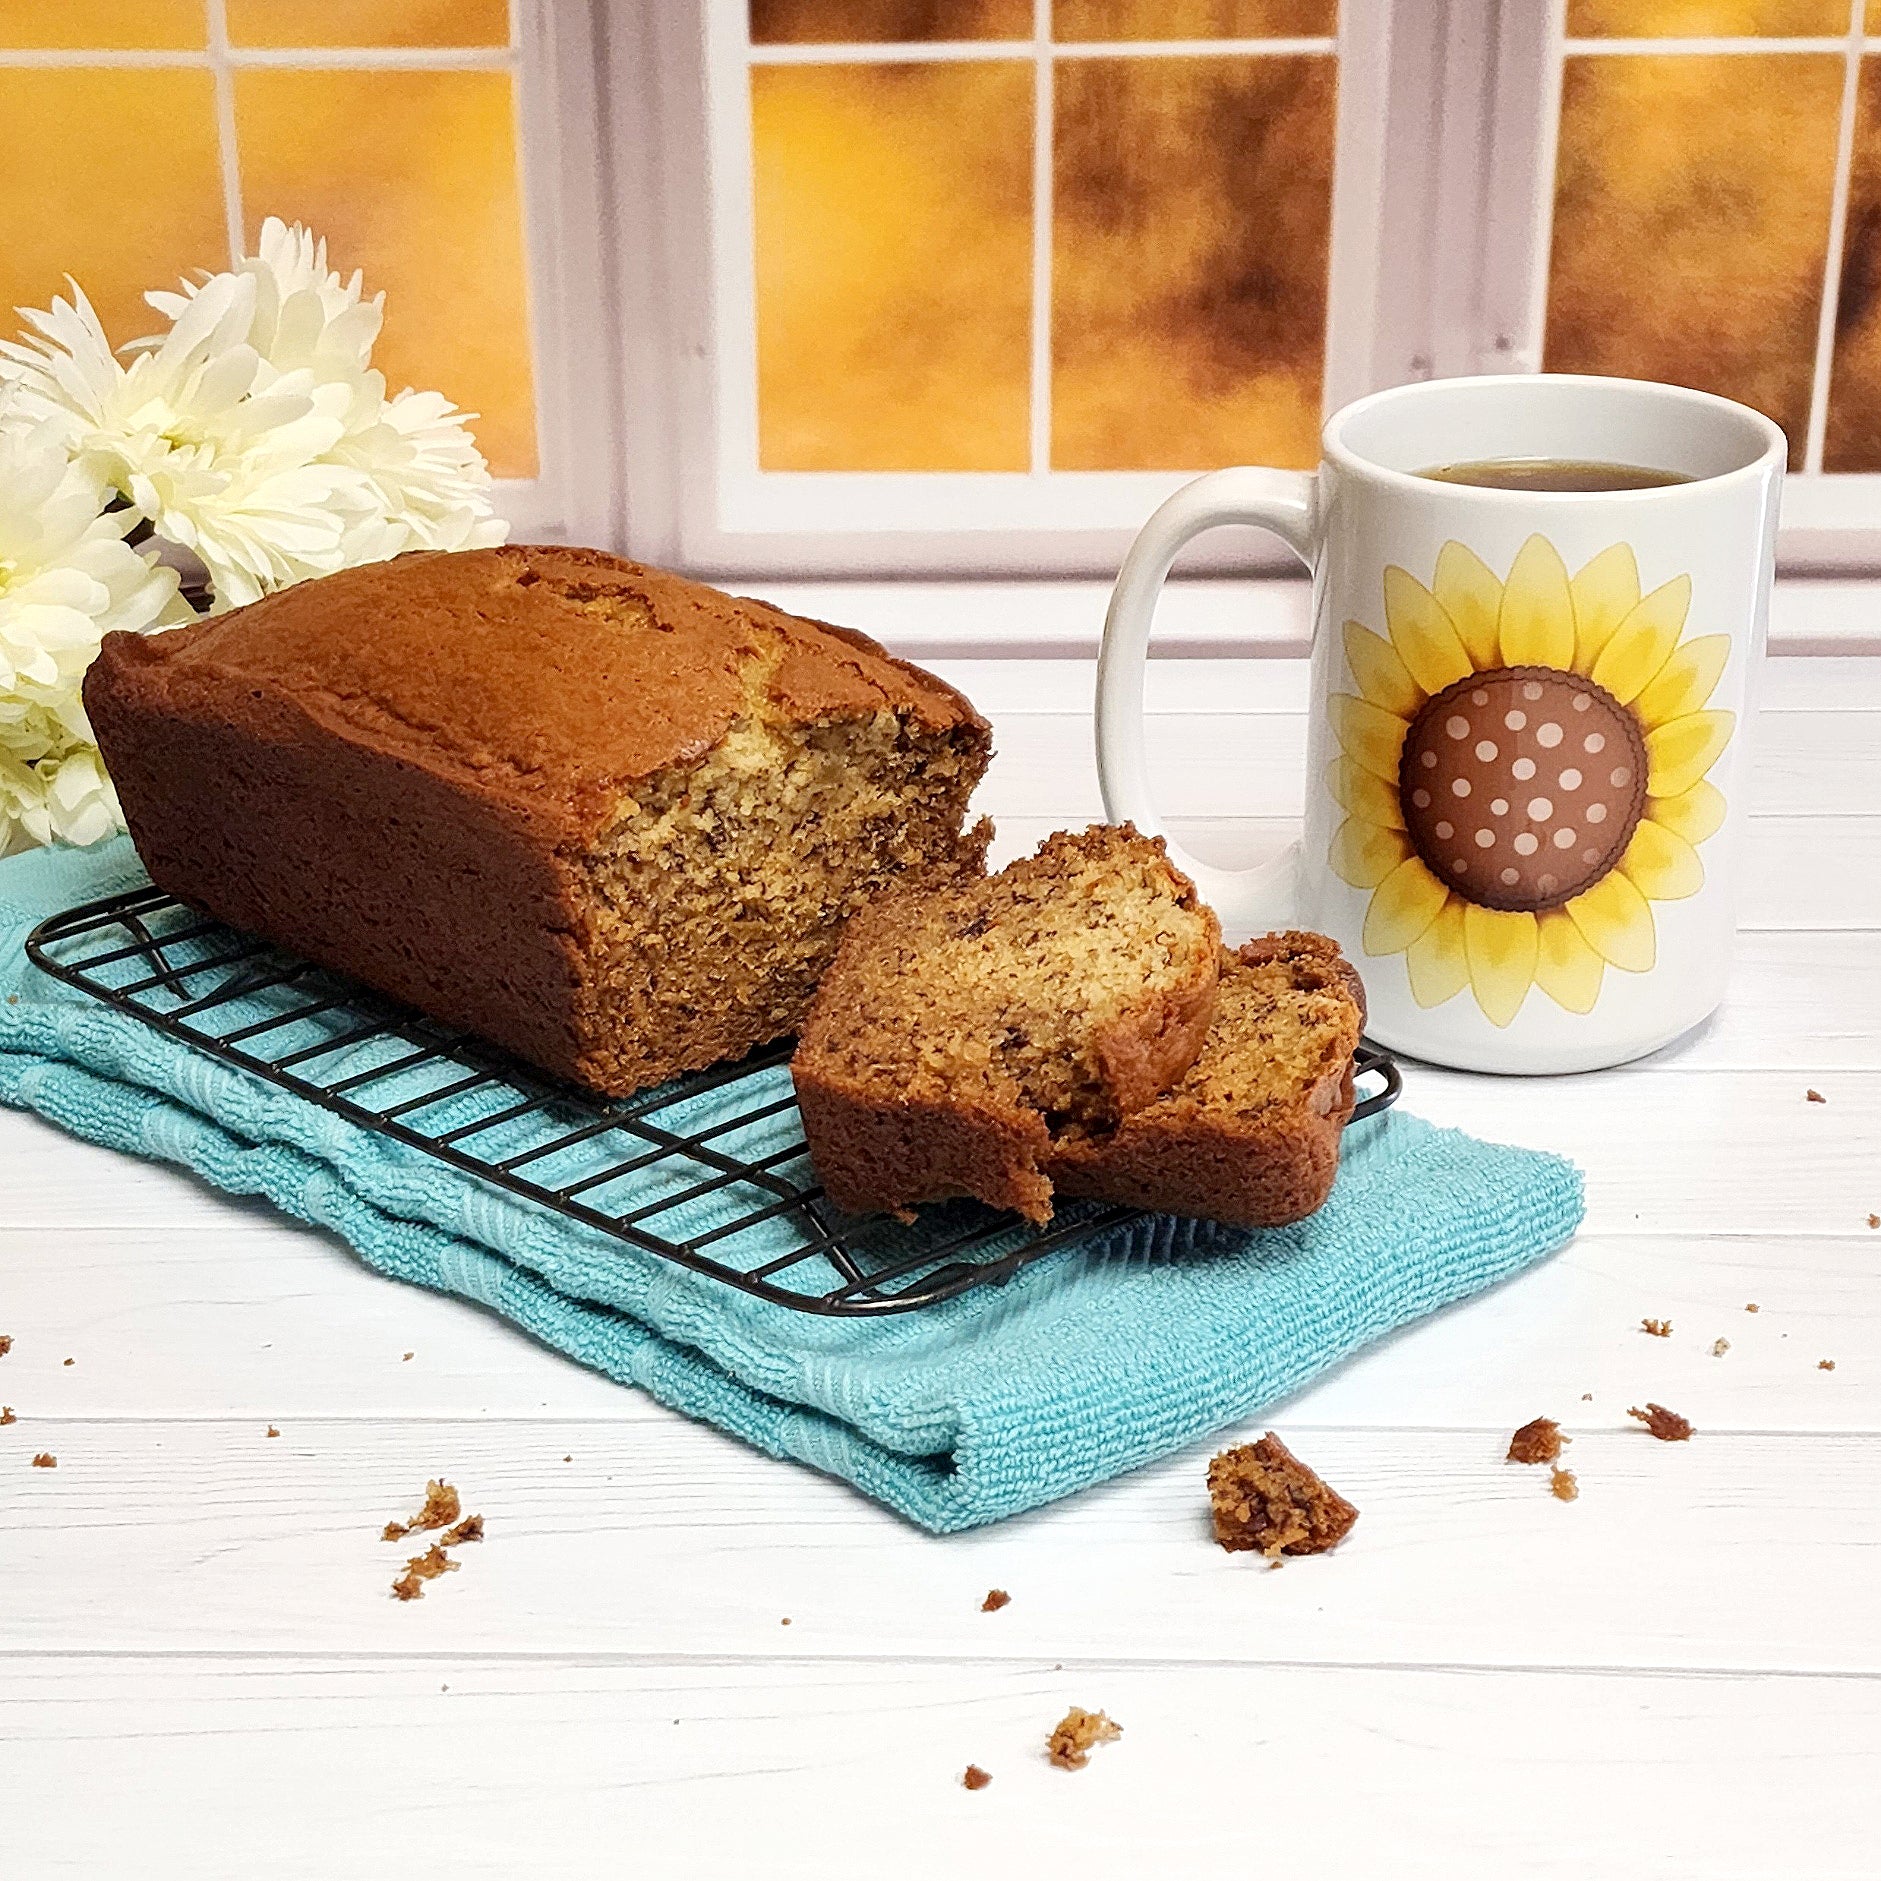 Cute 15oz sunflower mug on a table next to a banana bread loaf  in front a fall window scene.